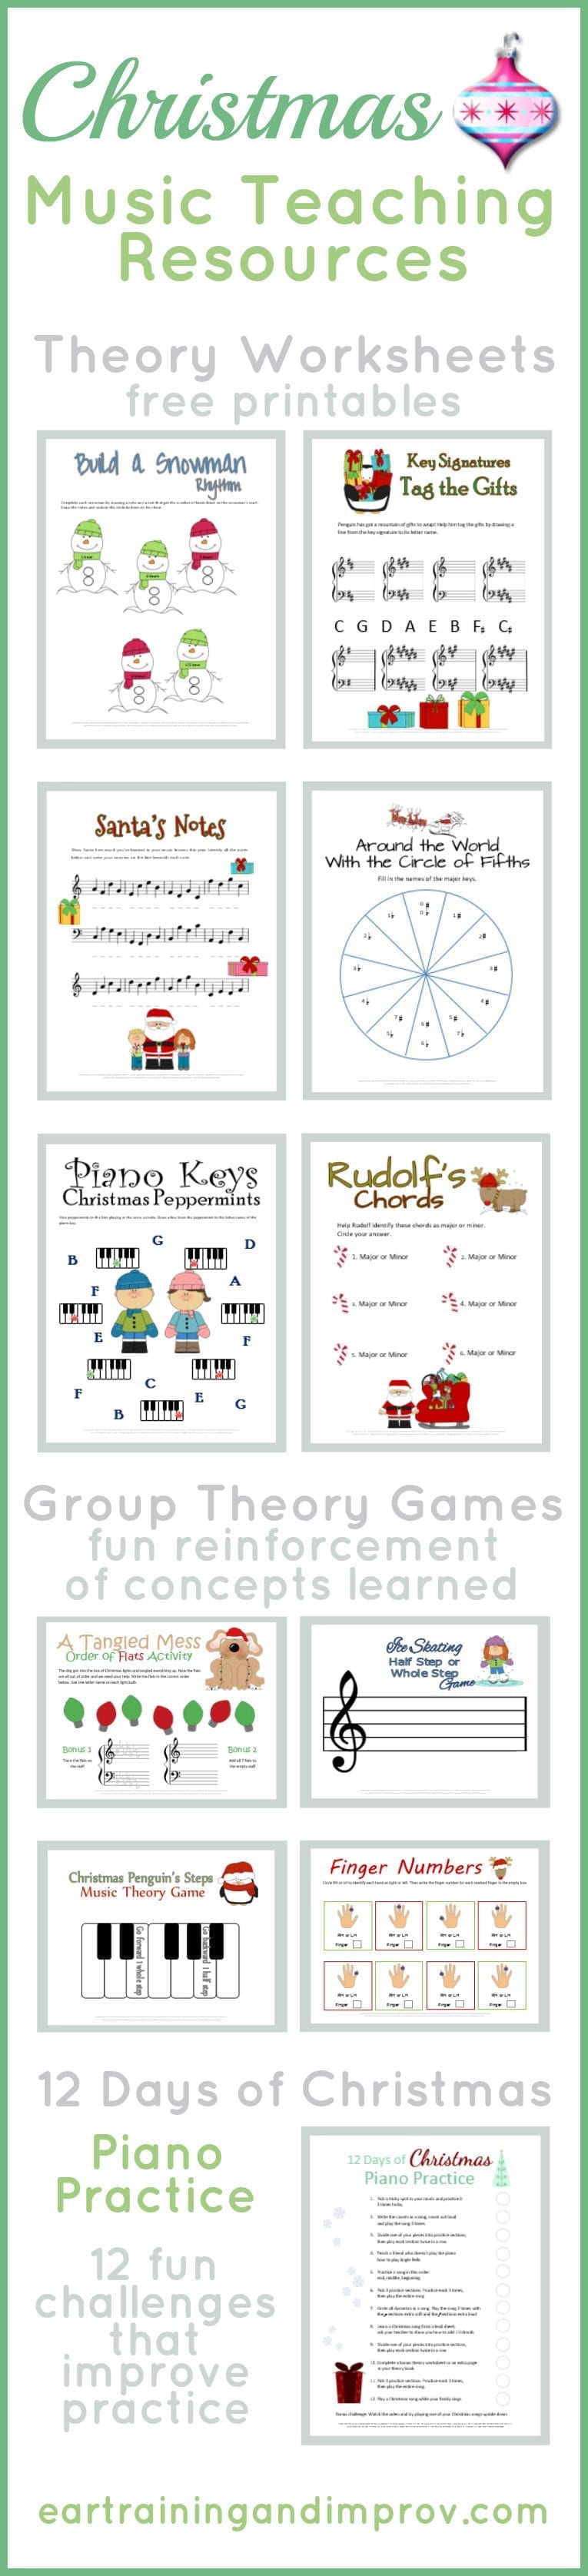 Christmas Music Theory Worksheets  20 Free Printables Intended For Fun Music Worksheets